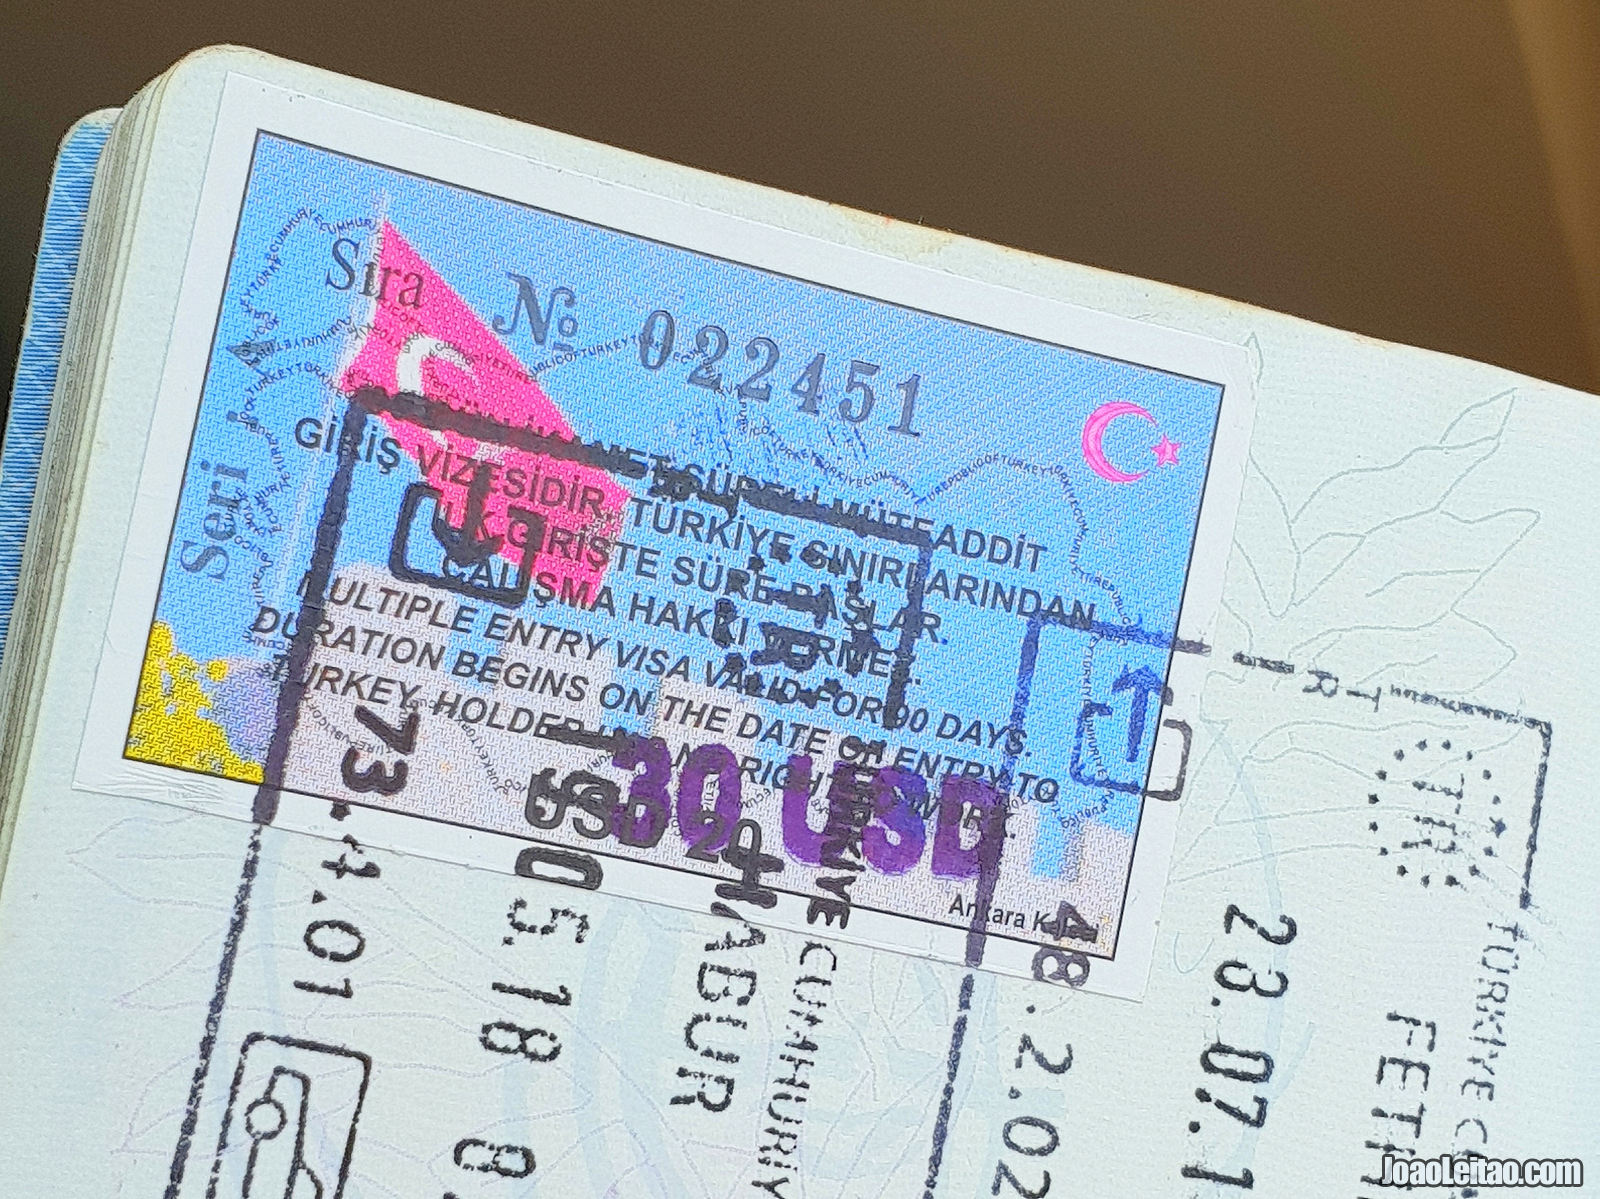 Turkey Tourist E-Visa Step-by-step Information With Q&A - Updated 2019